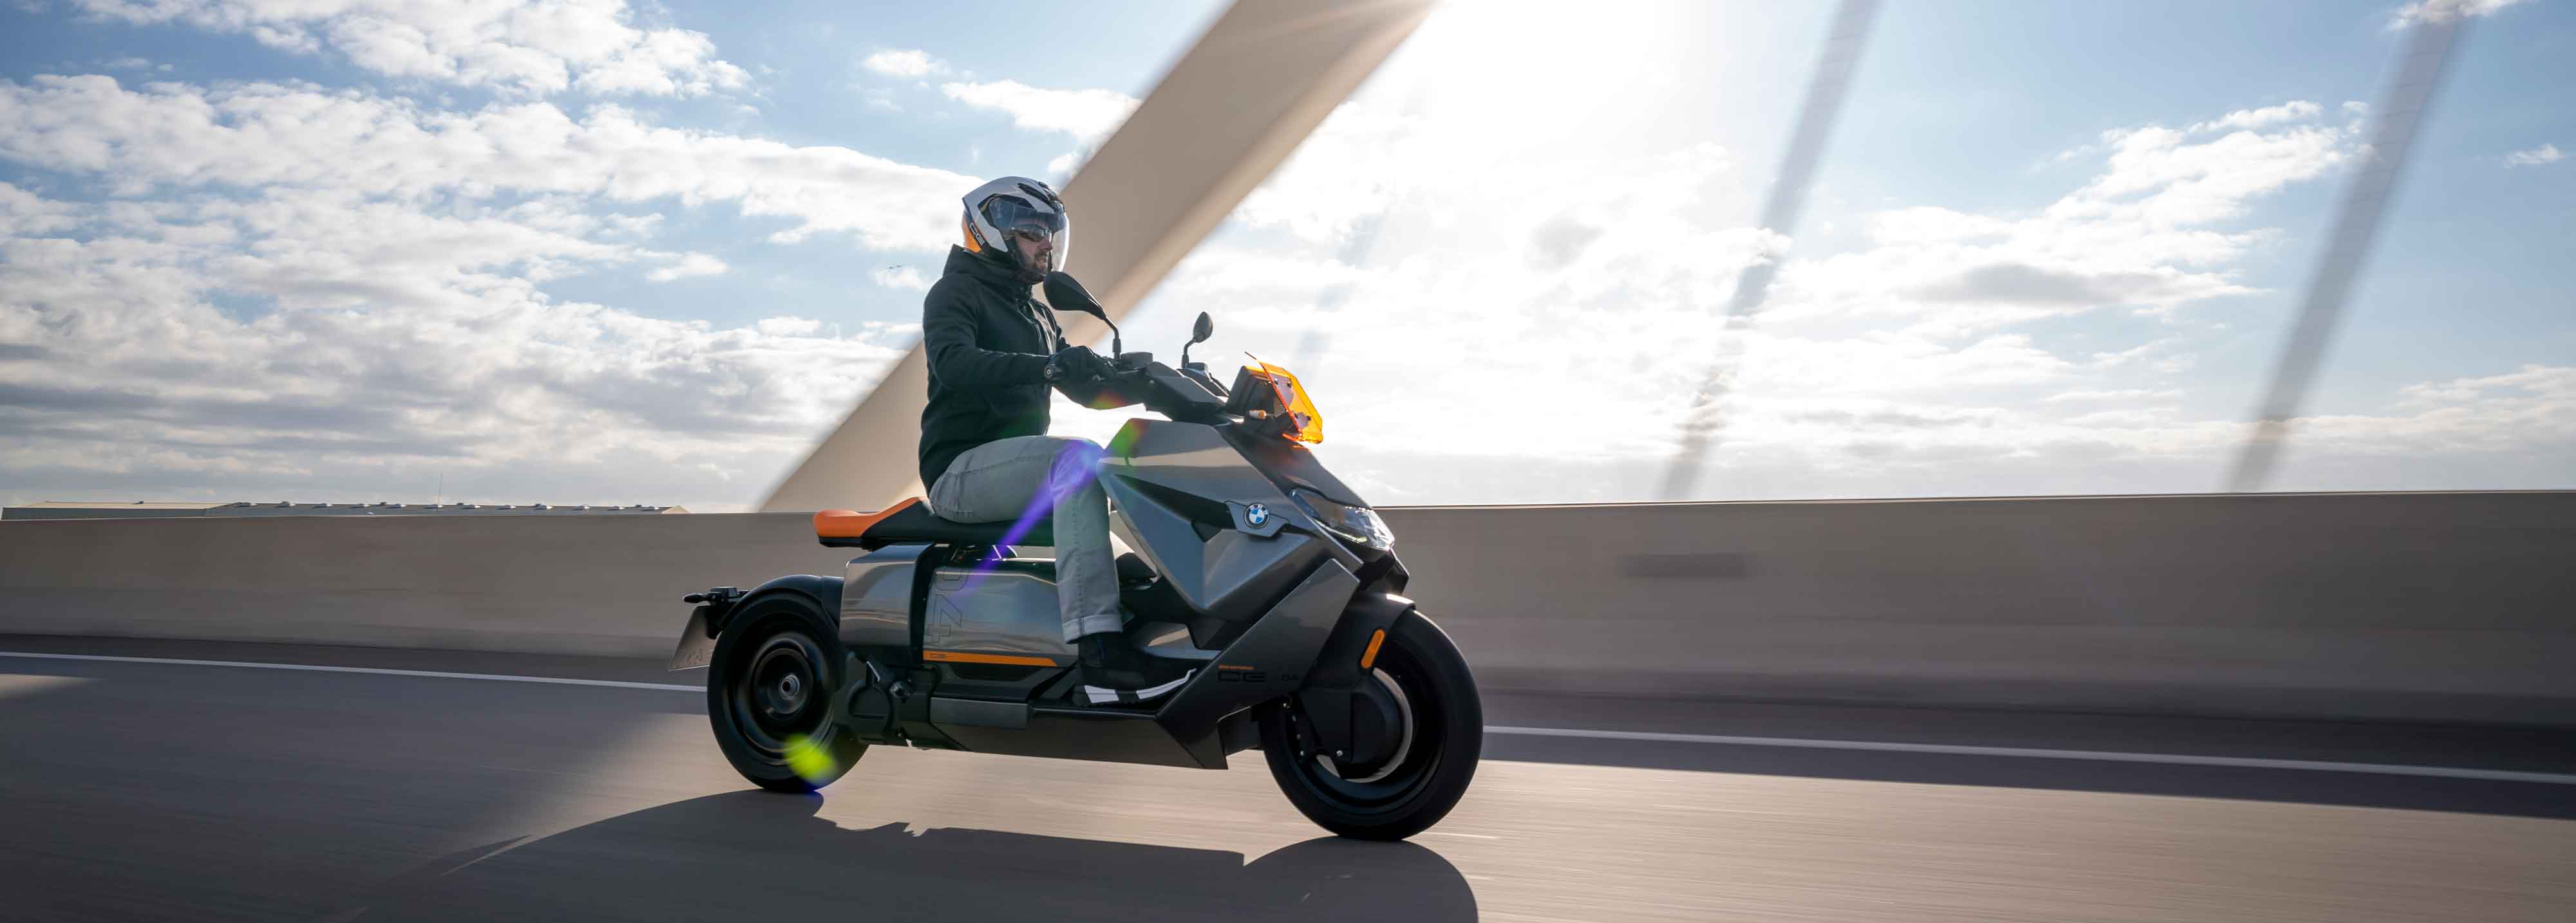 The BMW CE04: A powerful and eco friendly electric scooter video-banner